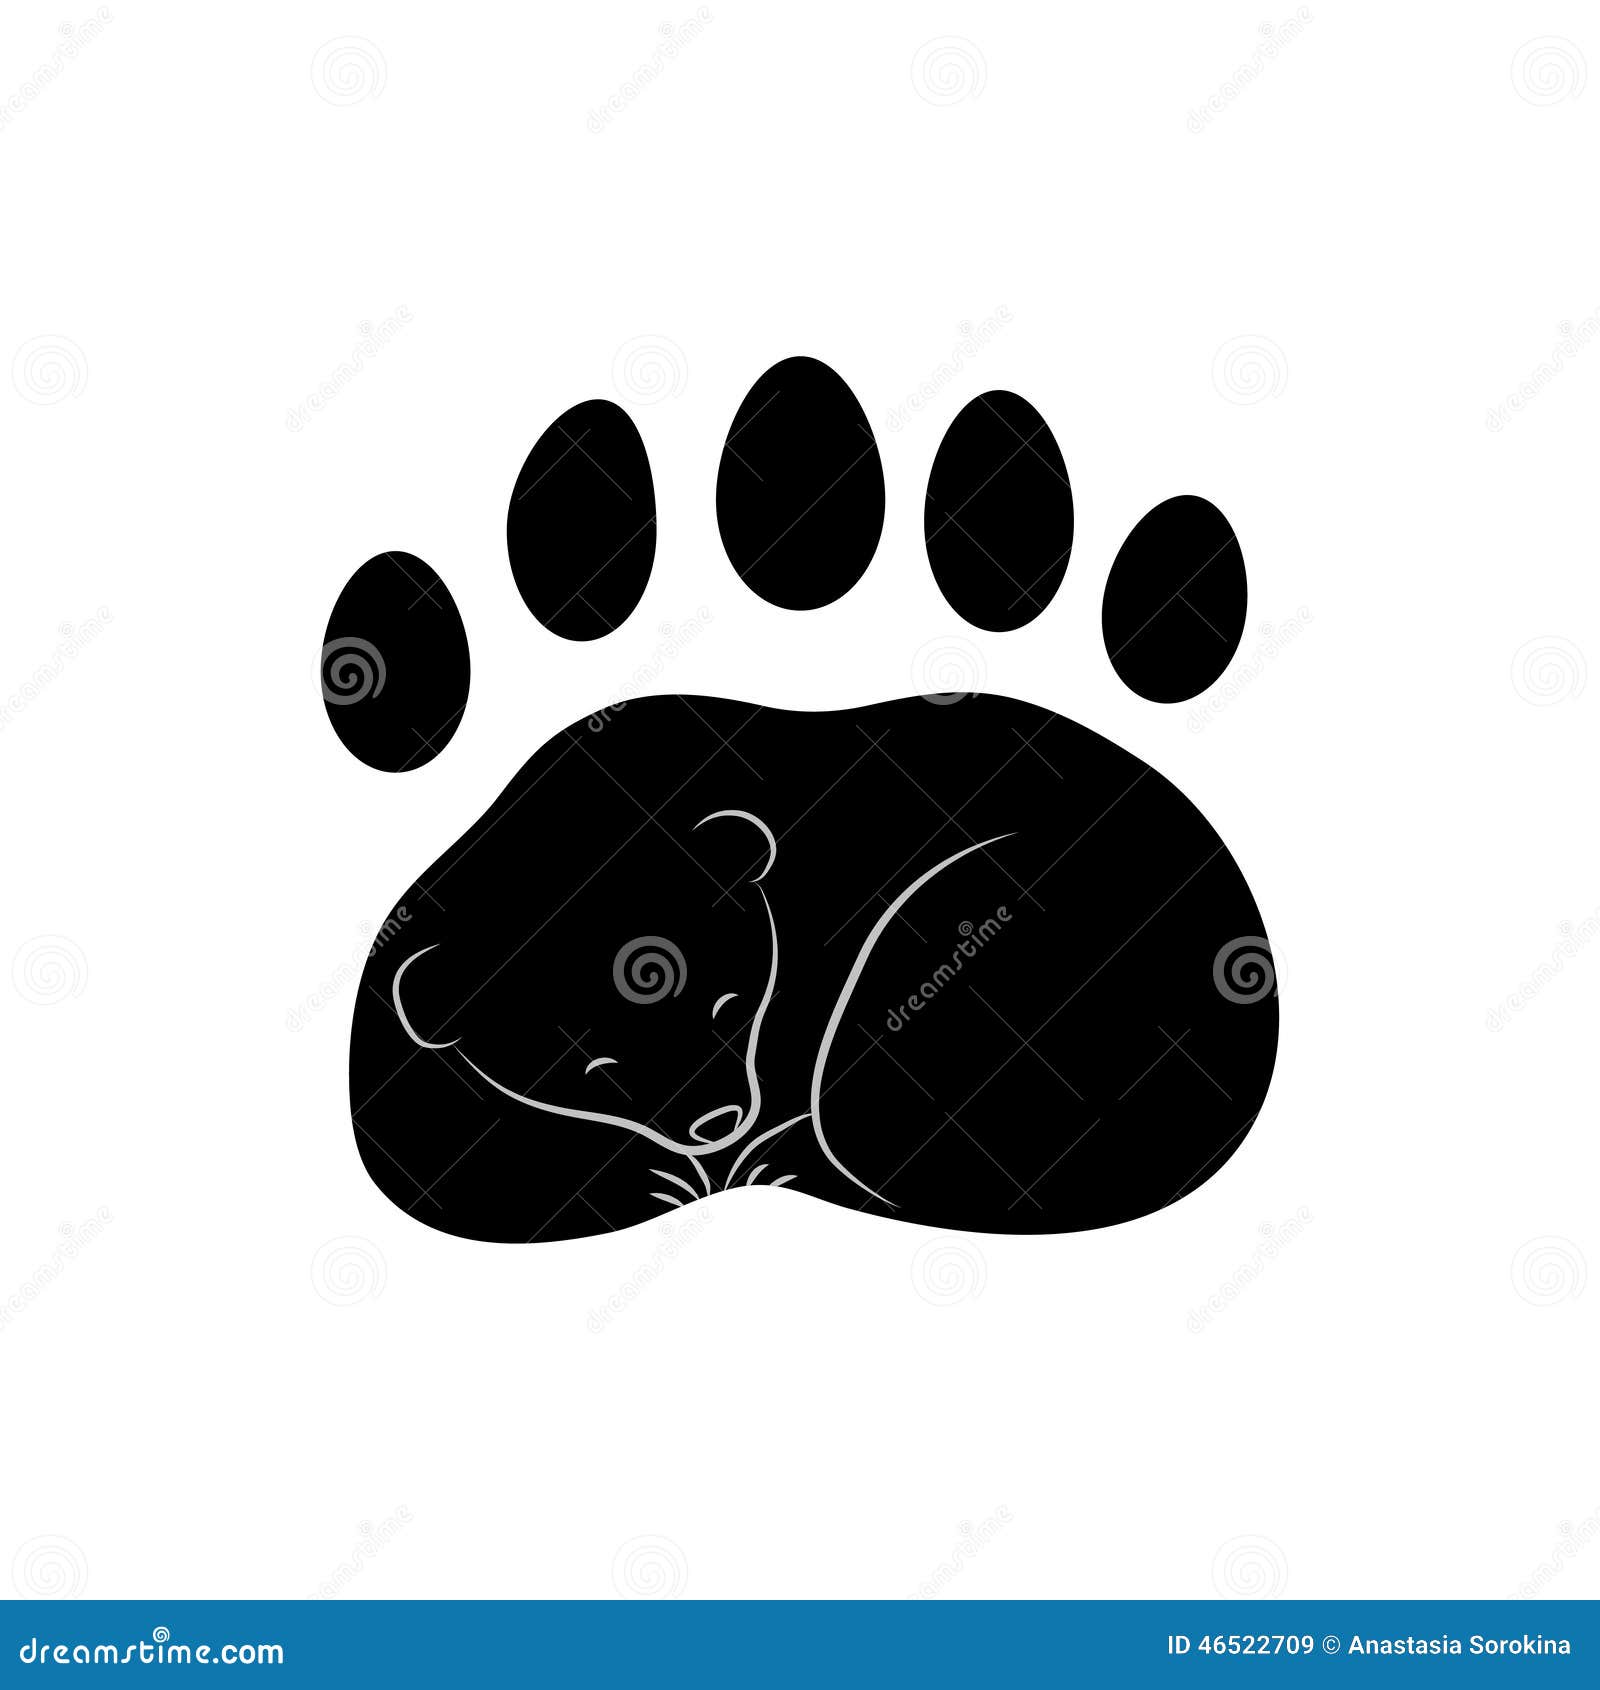 15 Adorable Paw Print Tattoo Designs for Animal Lovers  Bear claw tattoo  Pawprint tattoo Claw tattoo